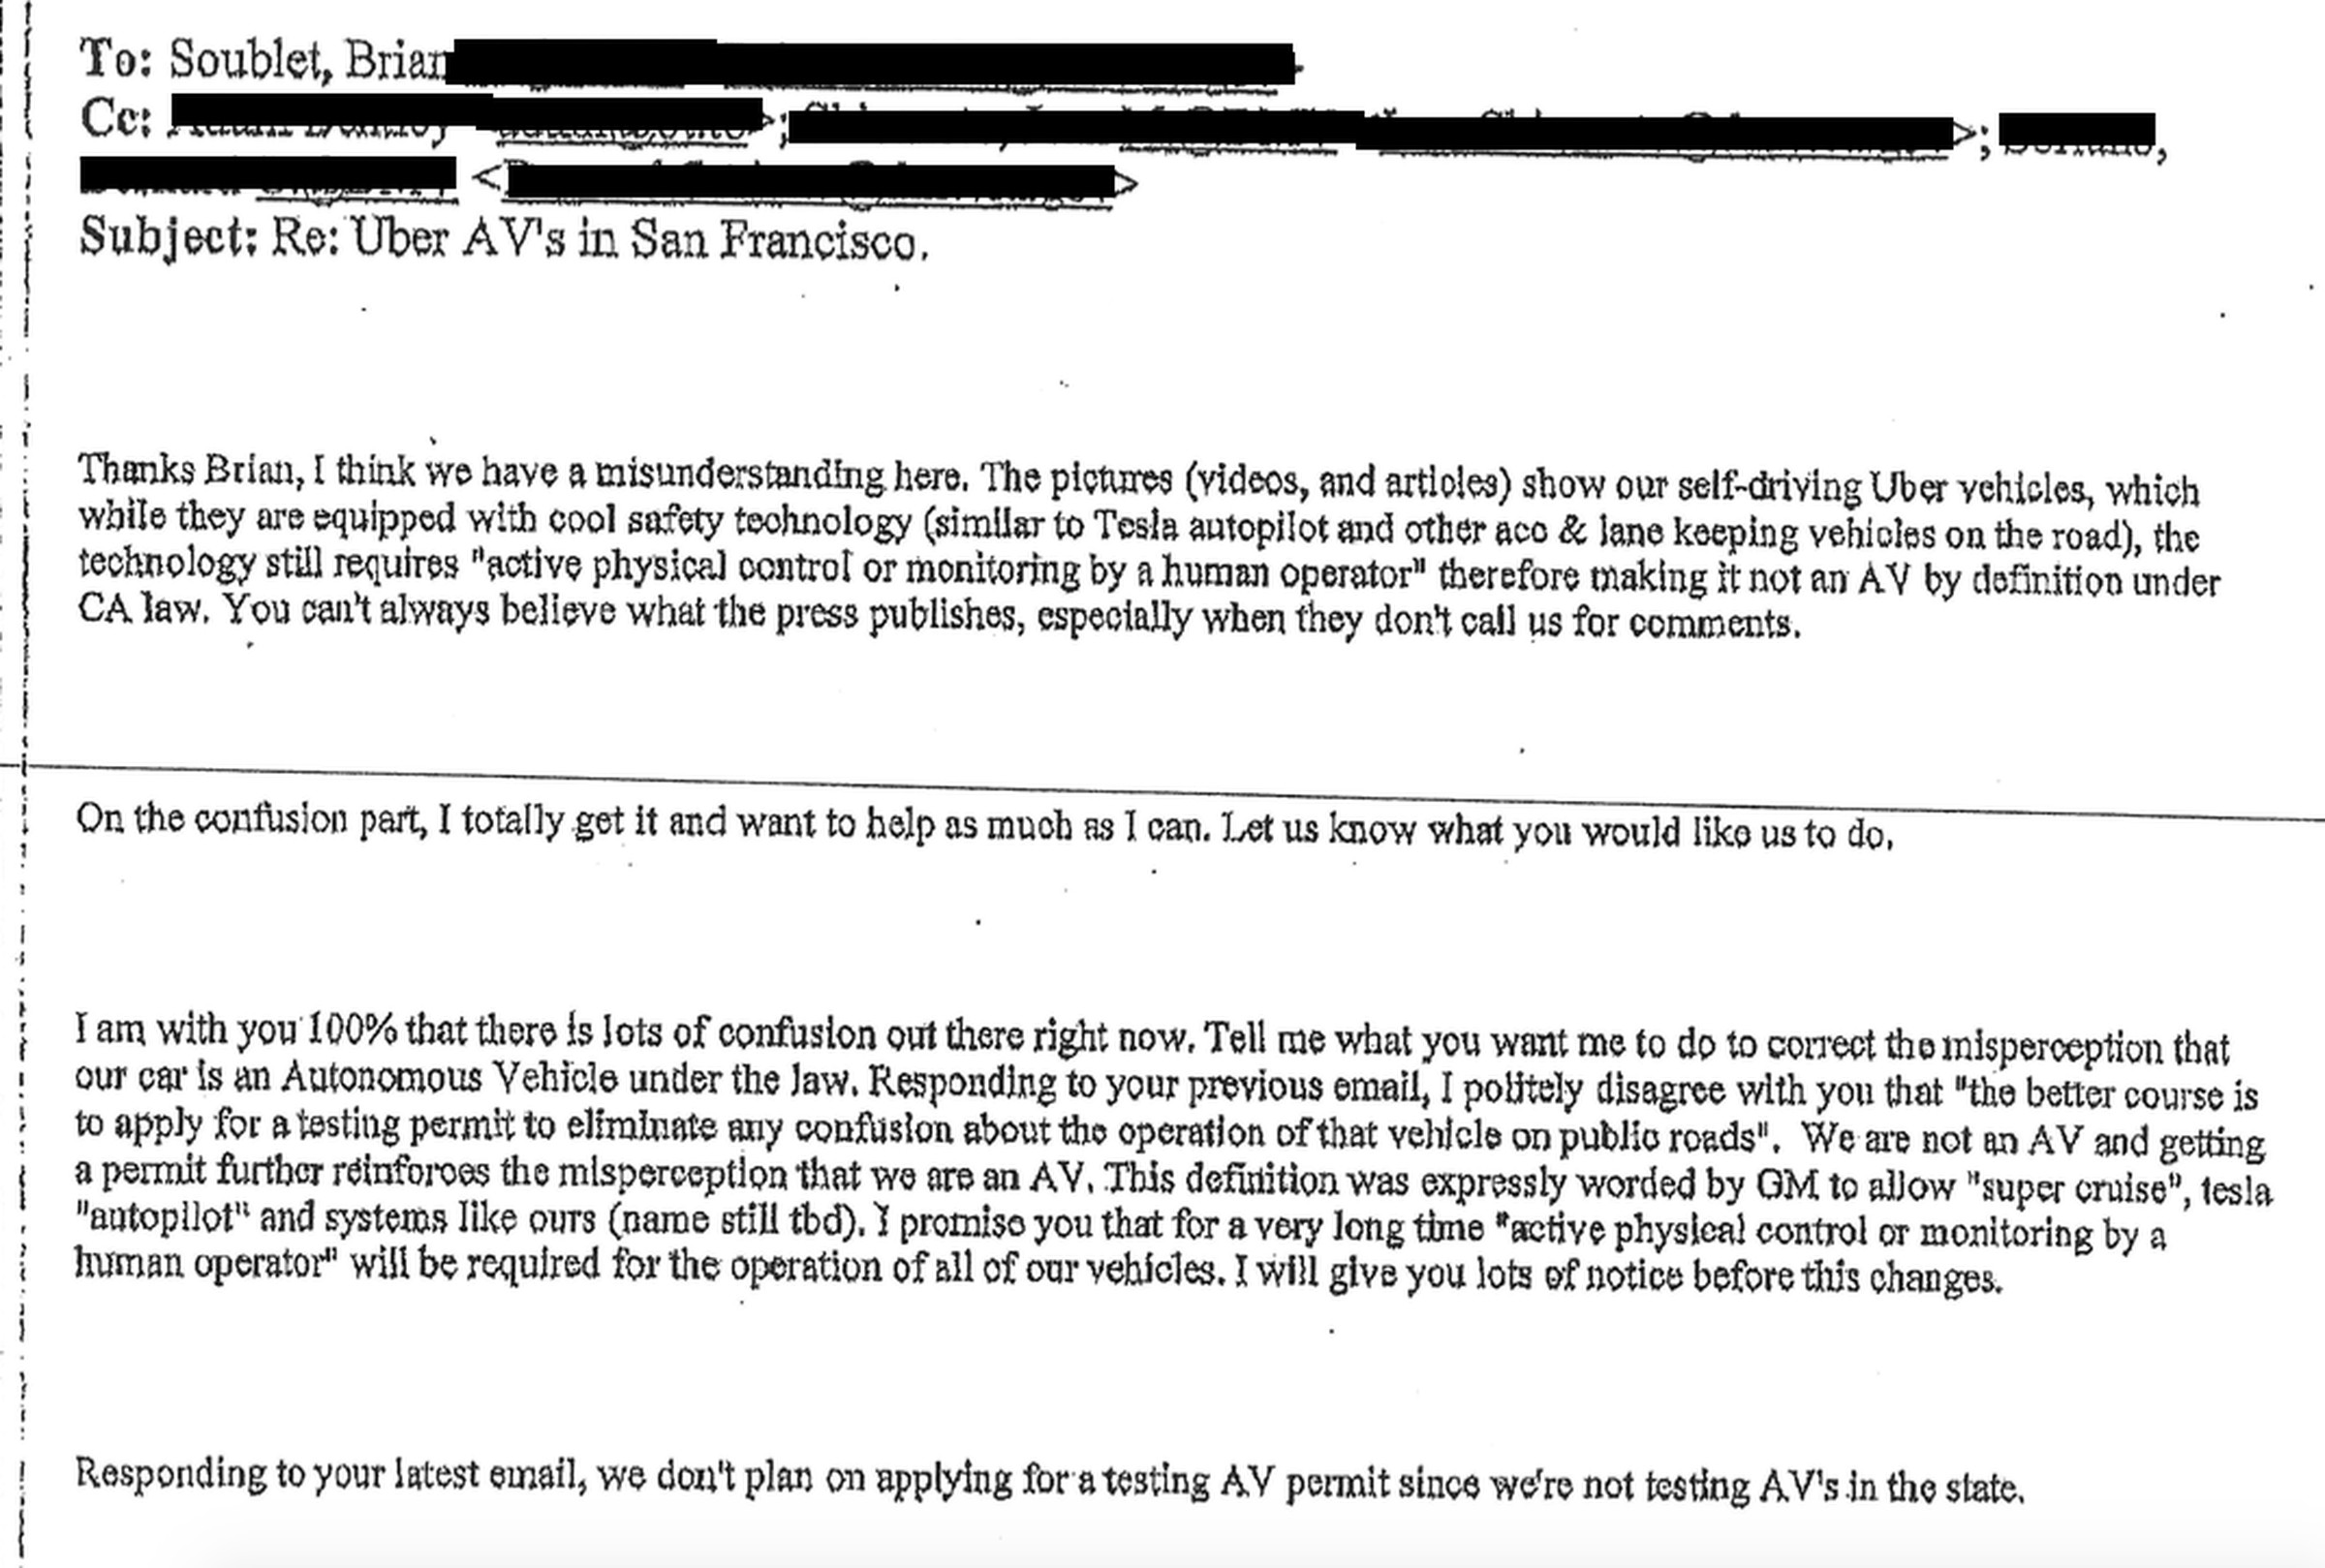 An email, dated September 22nd, from Uber’s Anthony Levandowski to the DMV’s Brian Soublet